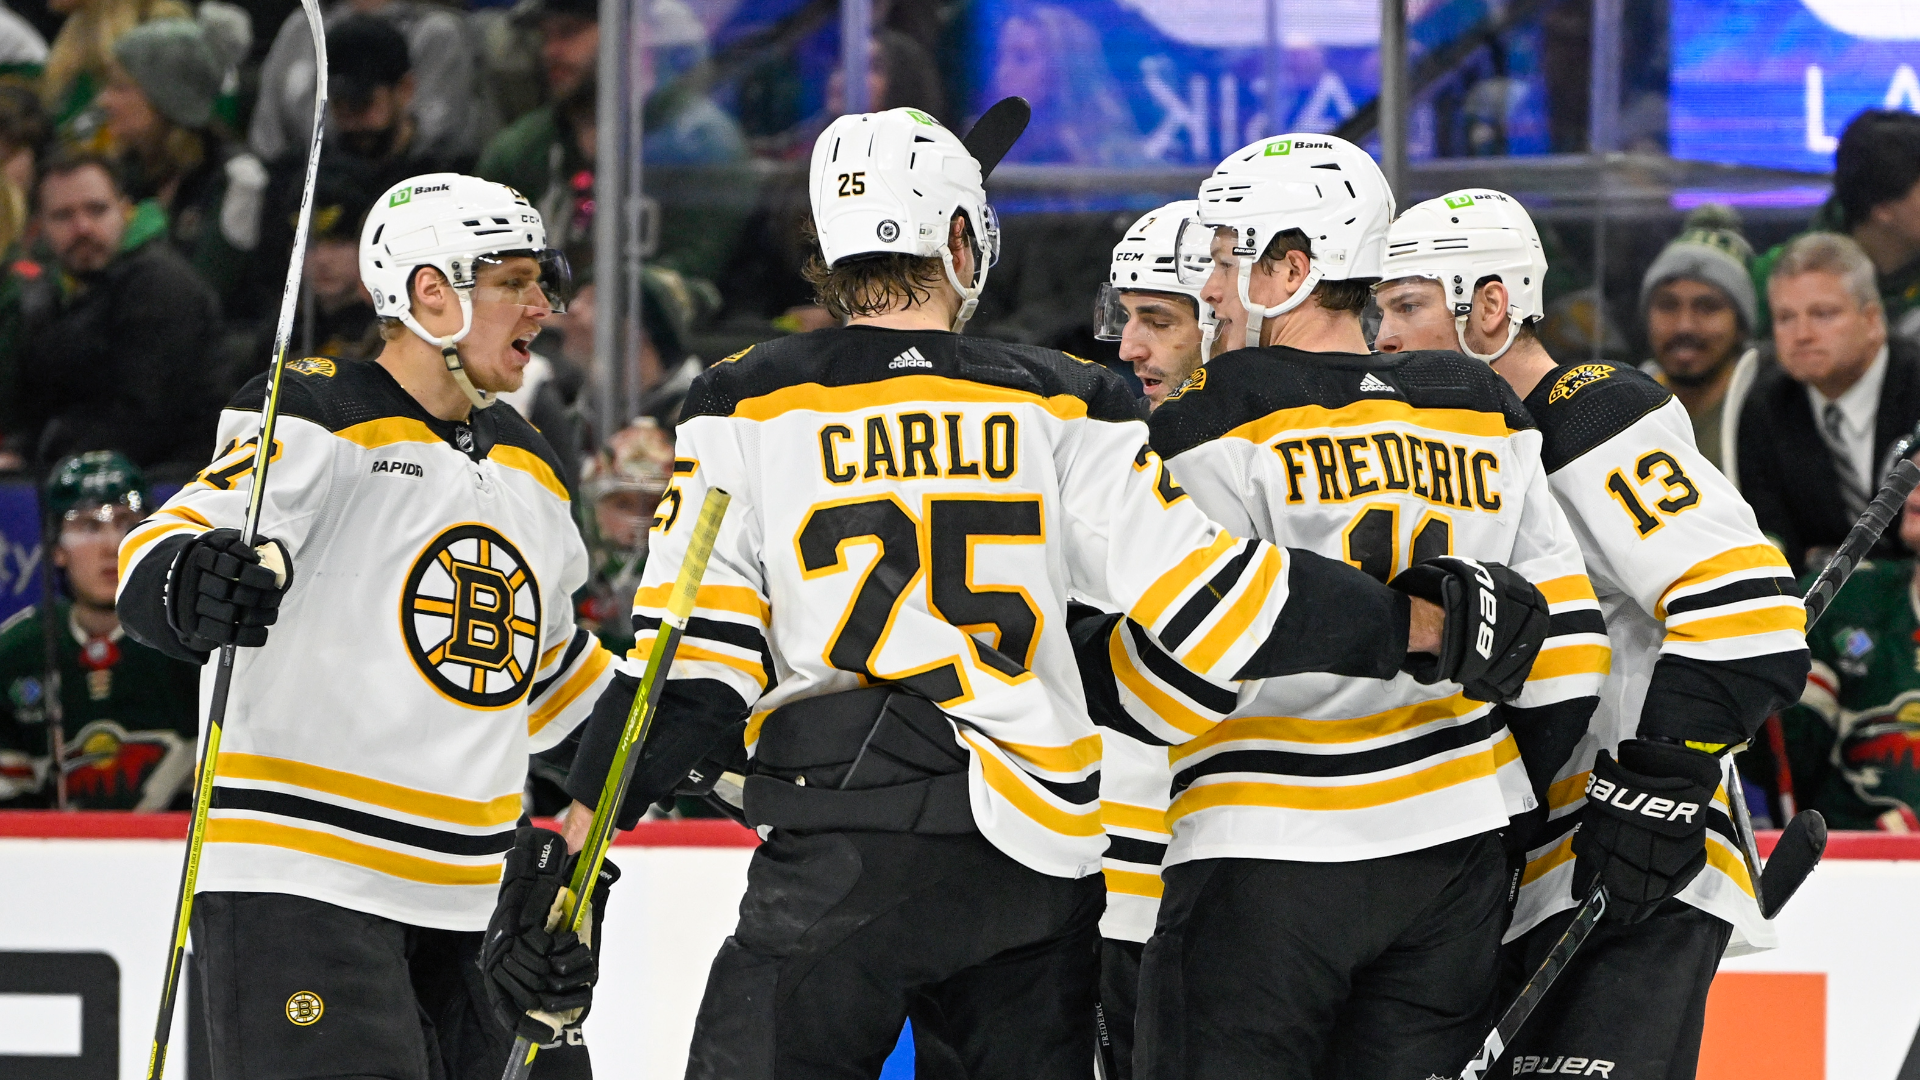 Bruins scrimmaged for Thursday night's opener at New Jersey.